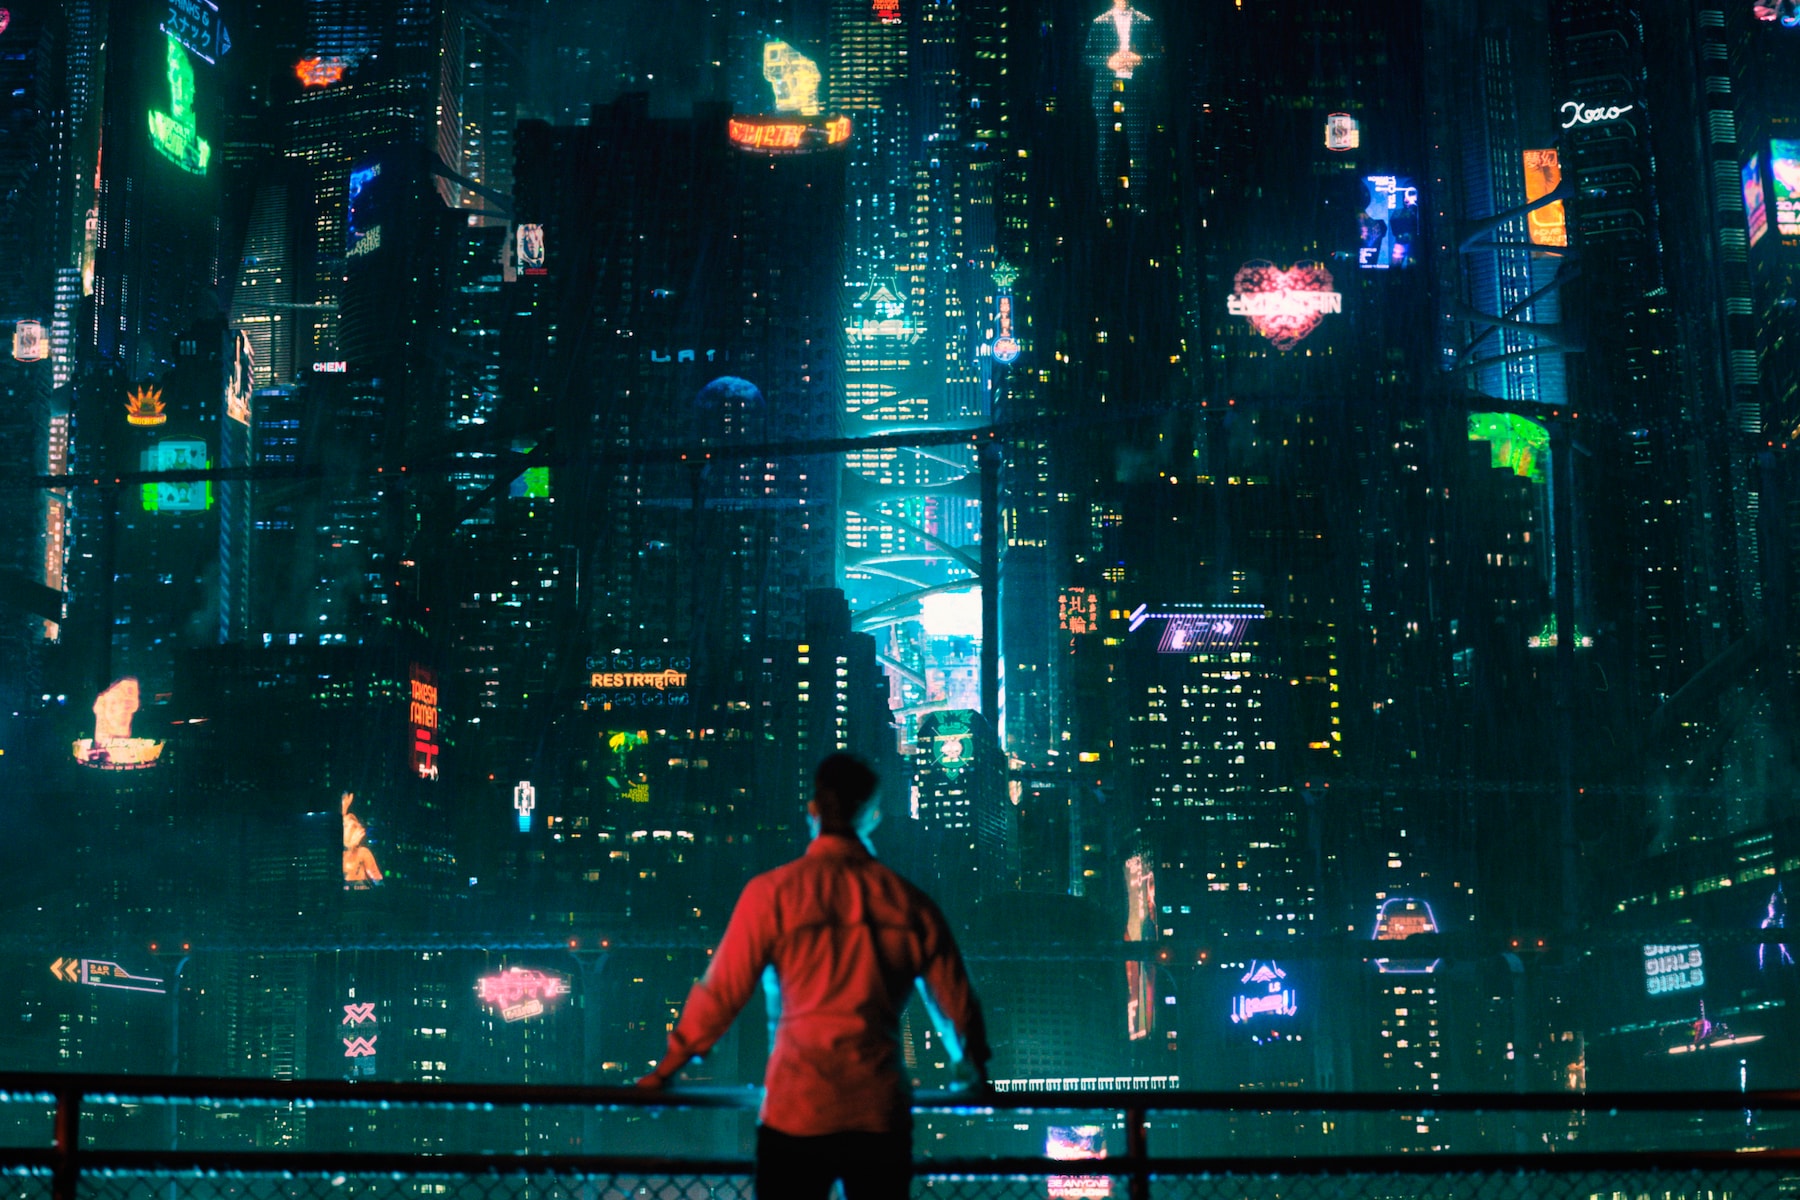 Netflix 原創科幻新作《Altered Carbon》最新預告釋出